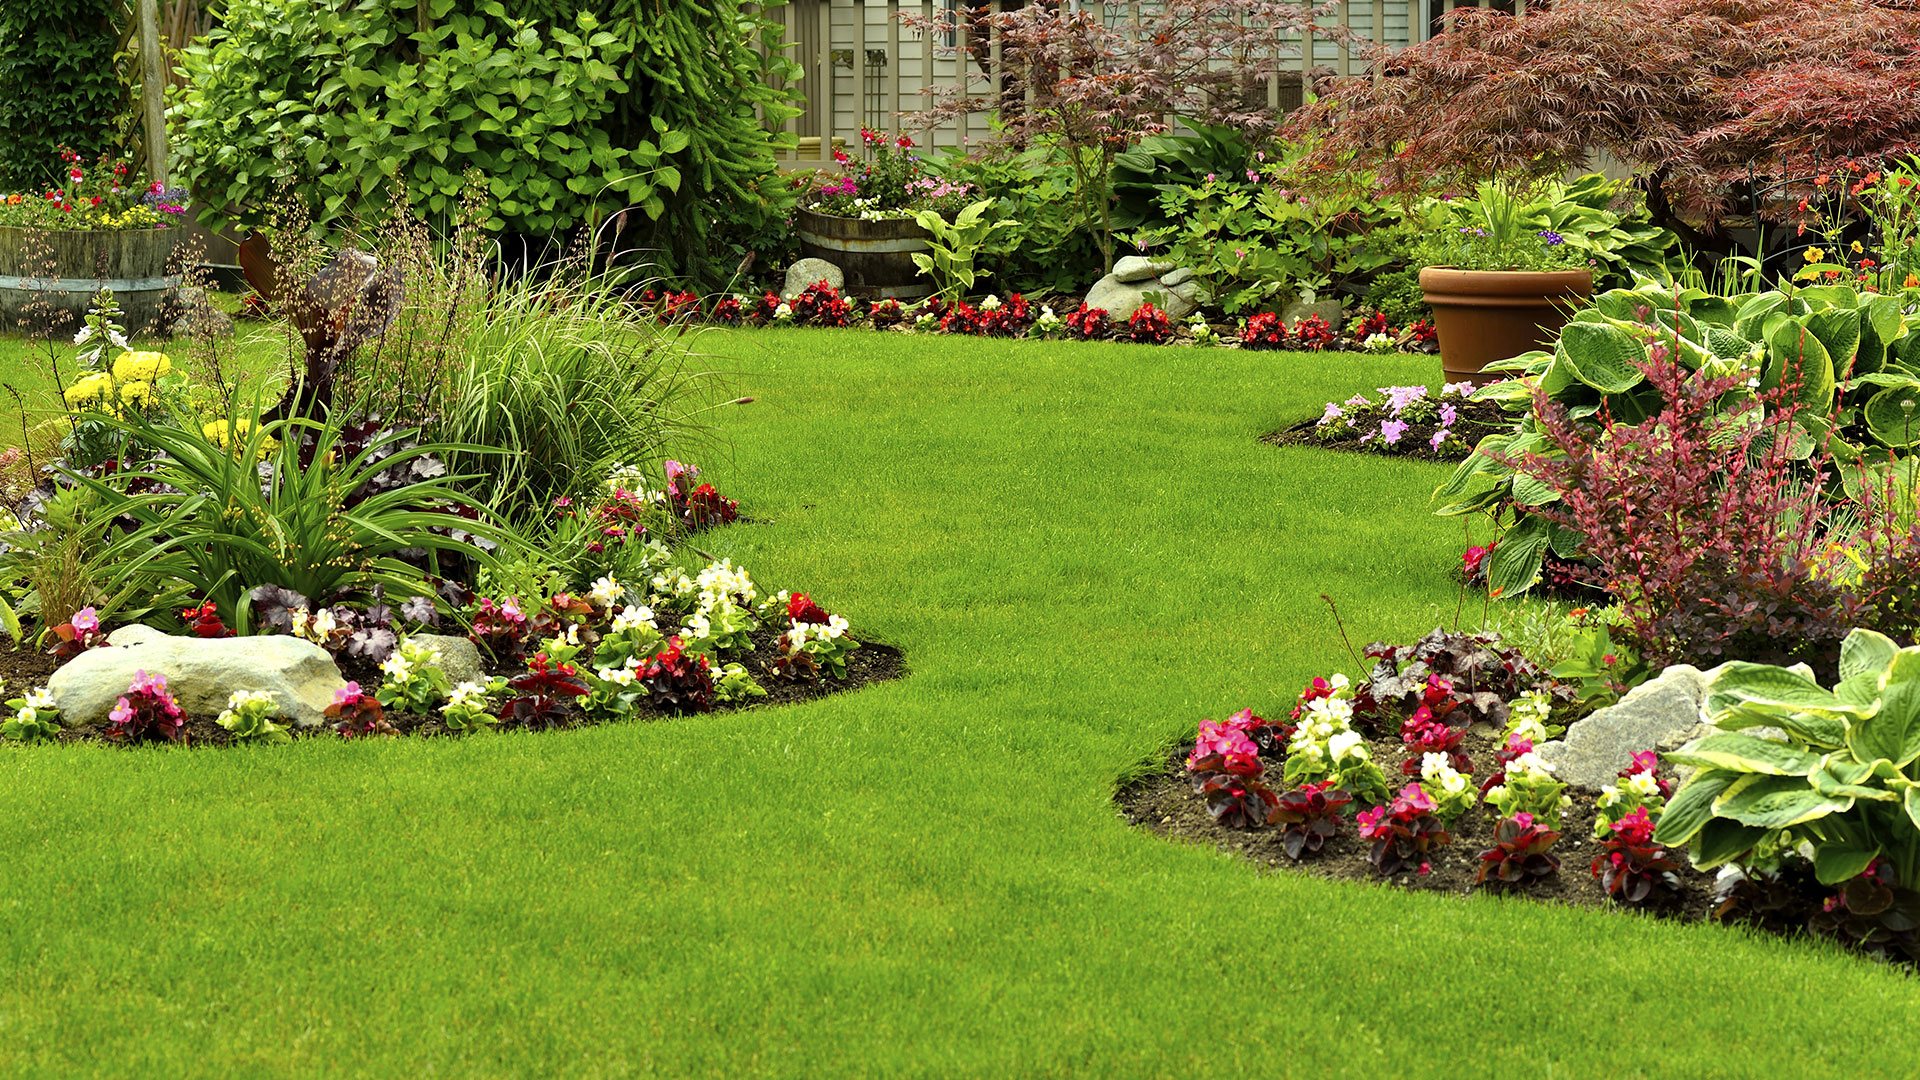 HD Image Landscaping